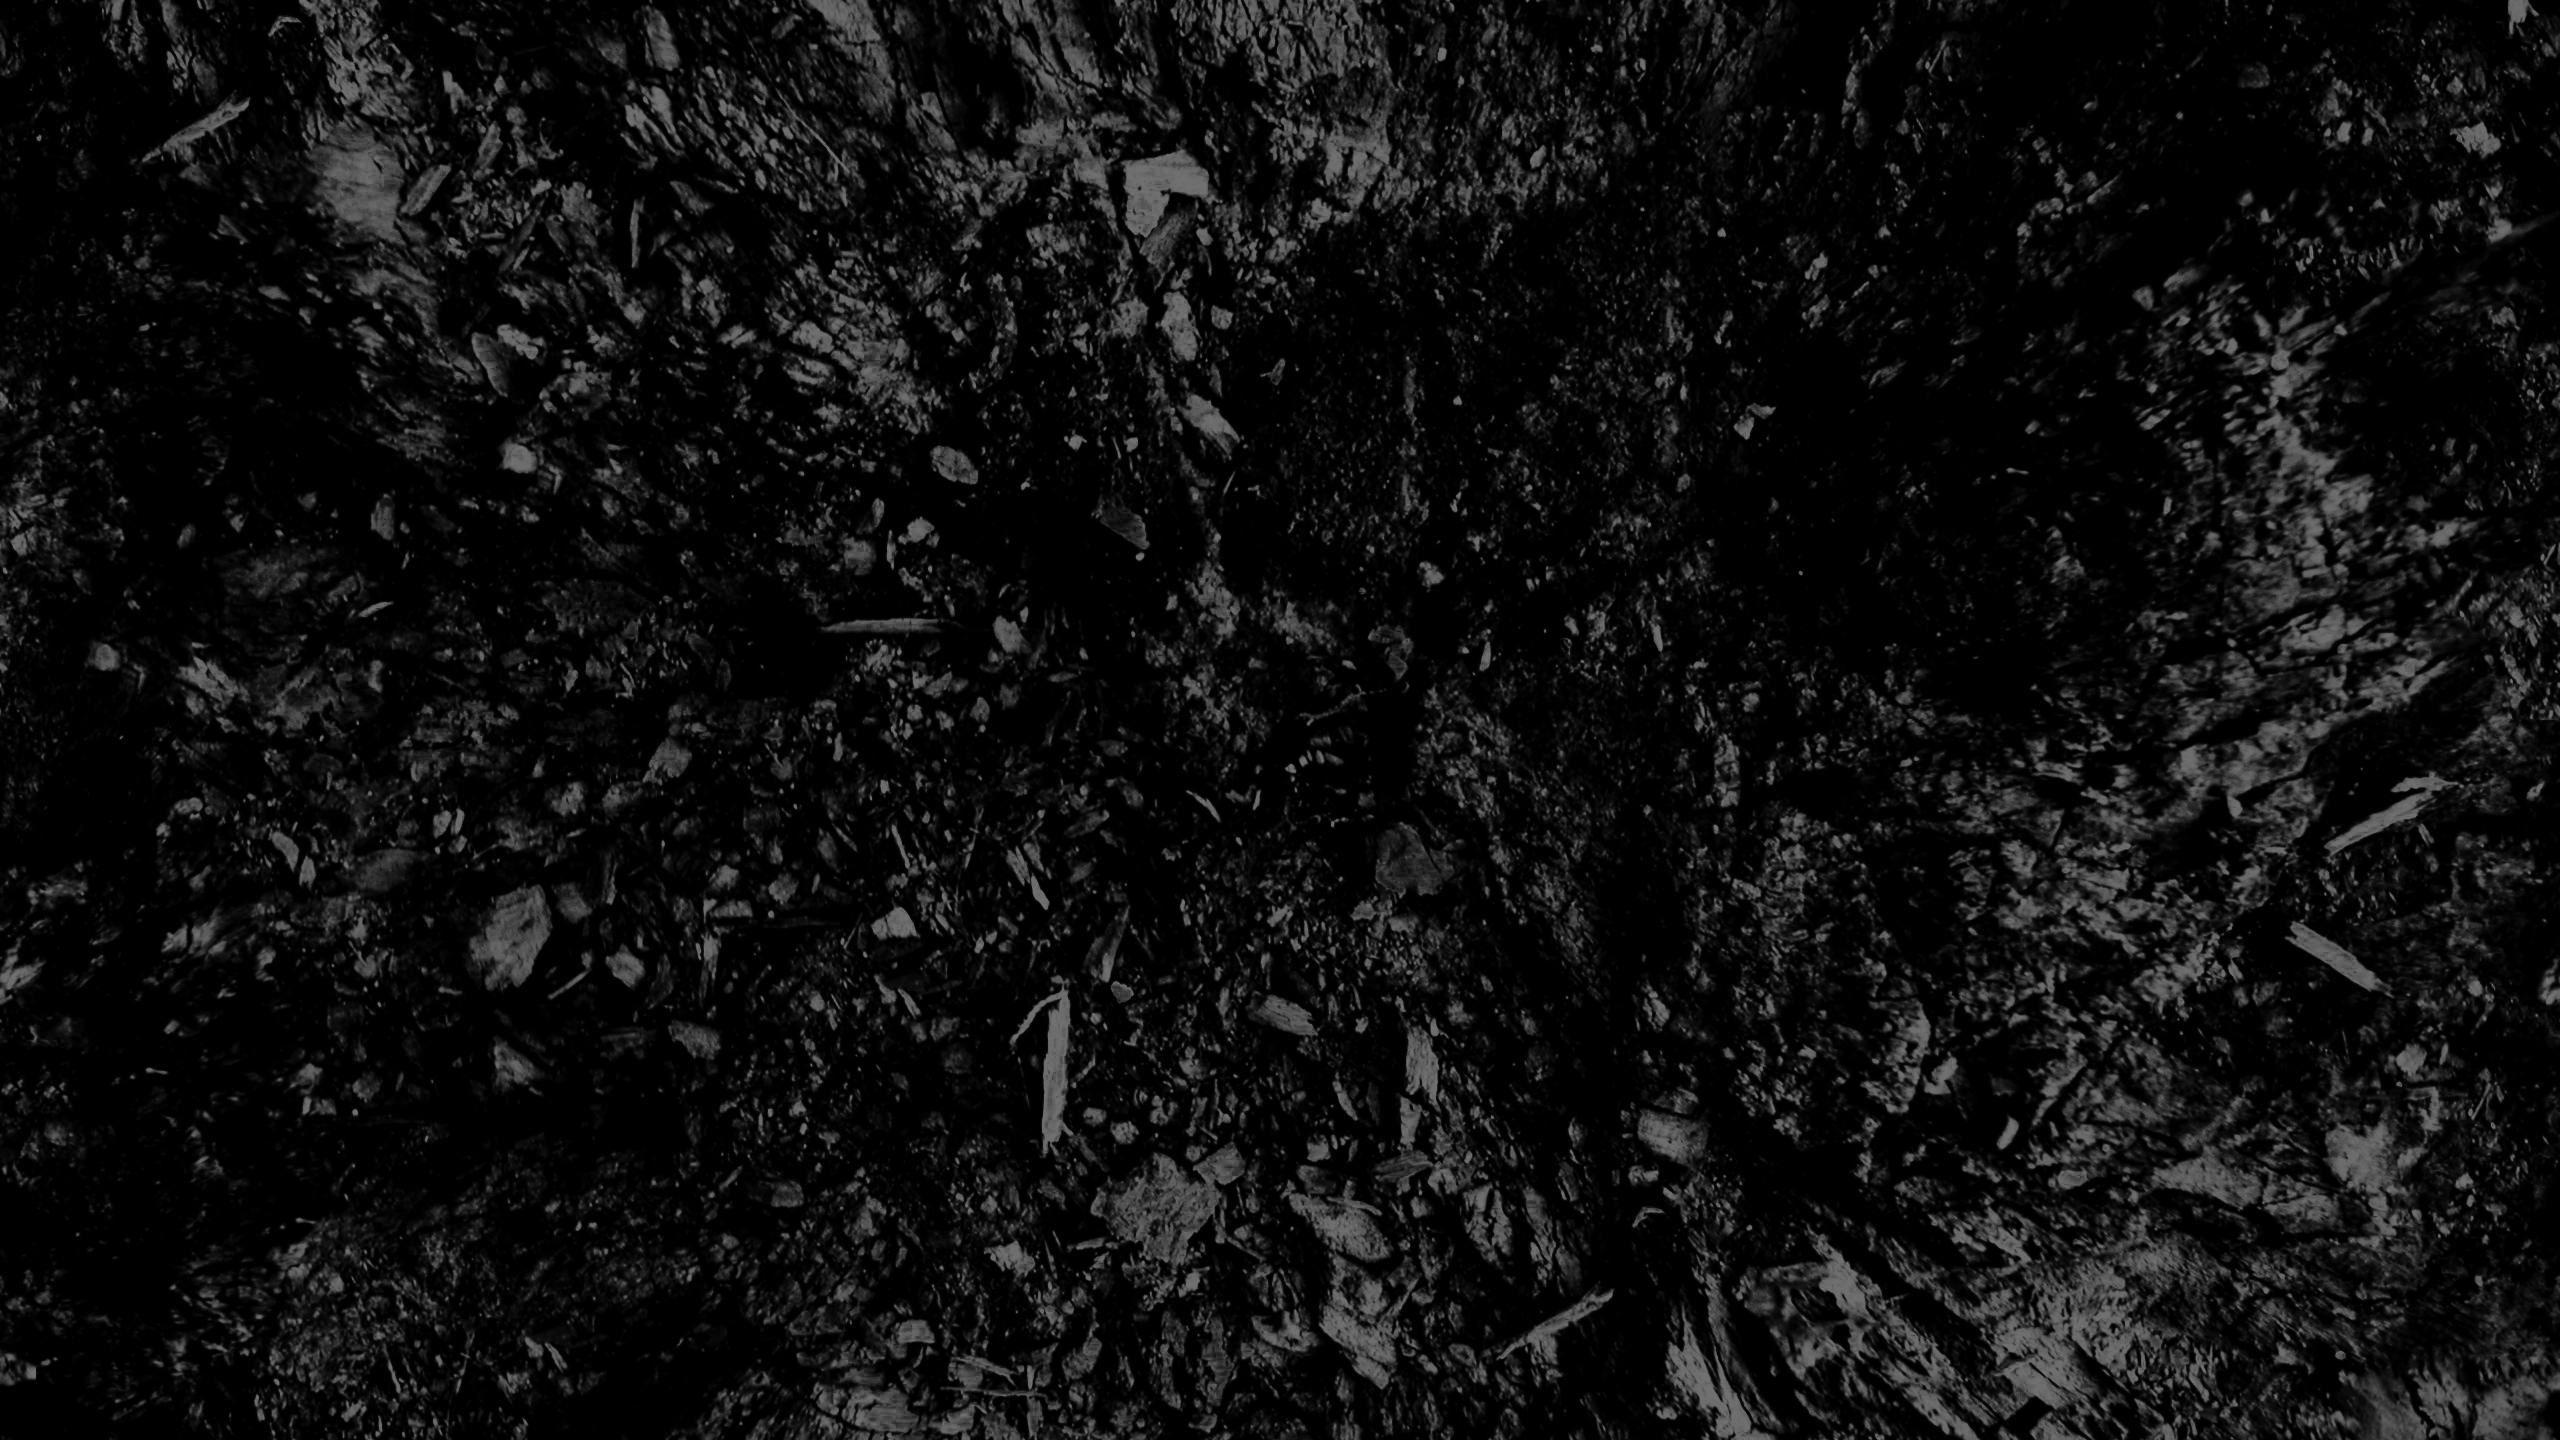 Download wallpaper 2560x1440 dark, black and white, abstract, black background widescreen 16:9 HD background